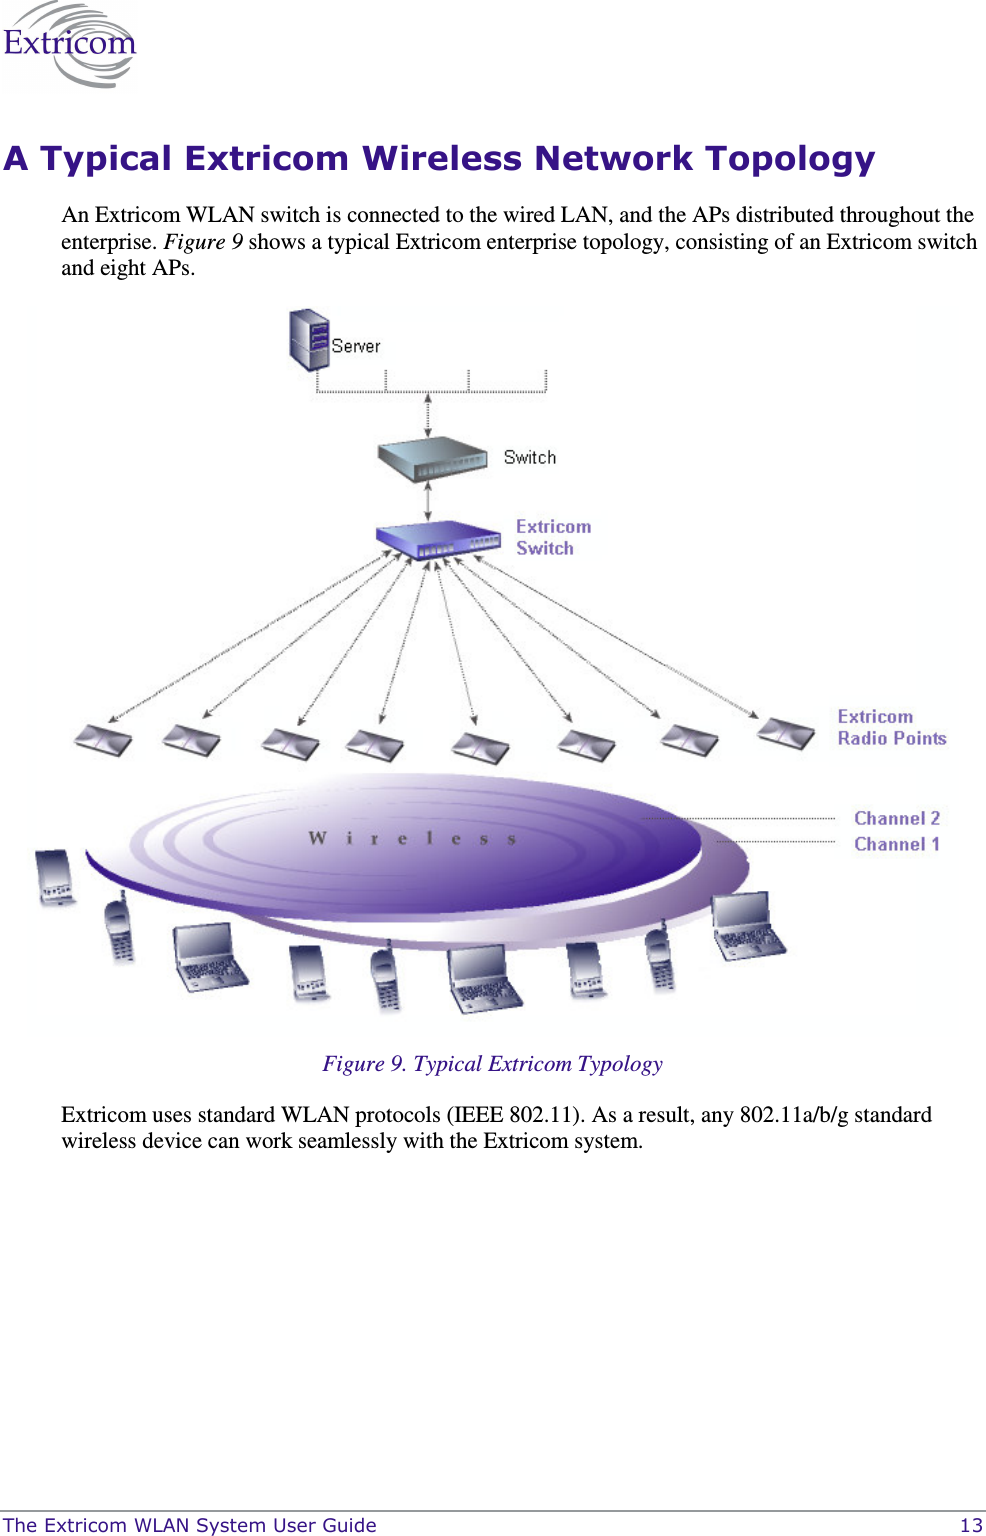  The Extricom WLAN System User Guide    13 A Typical Extricom Wireless Network Topology An Extricom WLAN switch is connected to the wired LAN, and the APs distributed throughout the enterprise. Figure 9 shows a typical Extricom enterprise topology, consisting of an Extricom switch and eight APs.  Figure 9. Typical Extricom Typology Extricom uses standard WLAN protocols (IEEE 802.11). As a result, any 802.11a/b/g standard wireless device can work seamlessly with the Extricom system. 